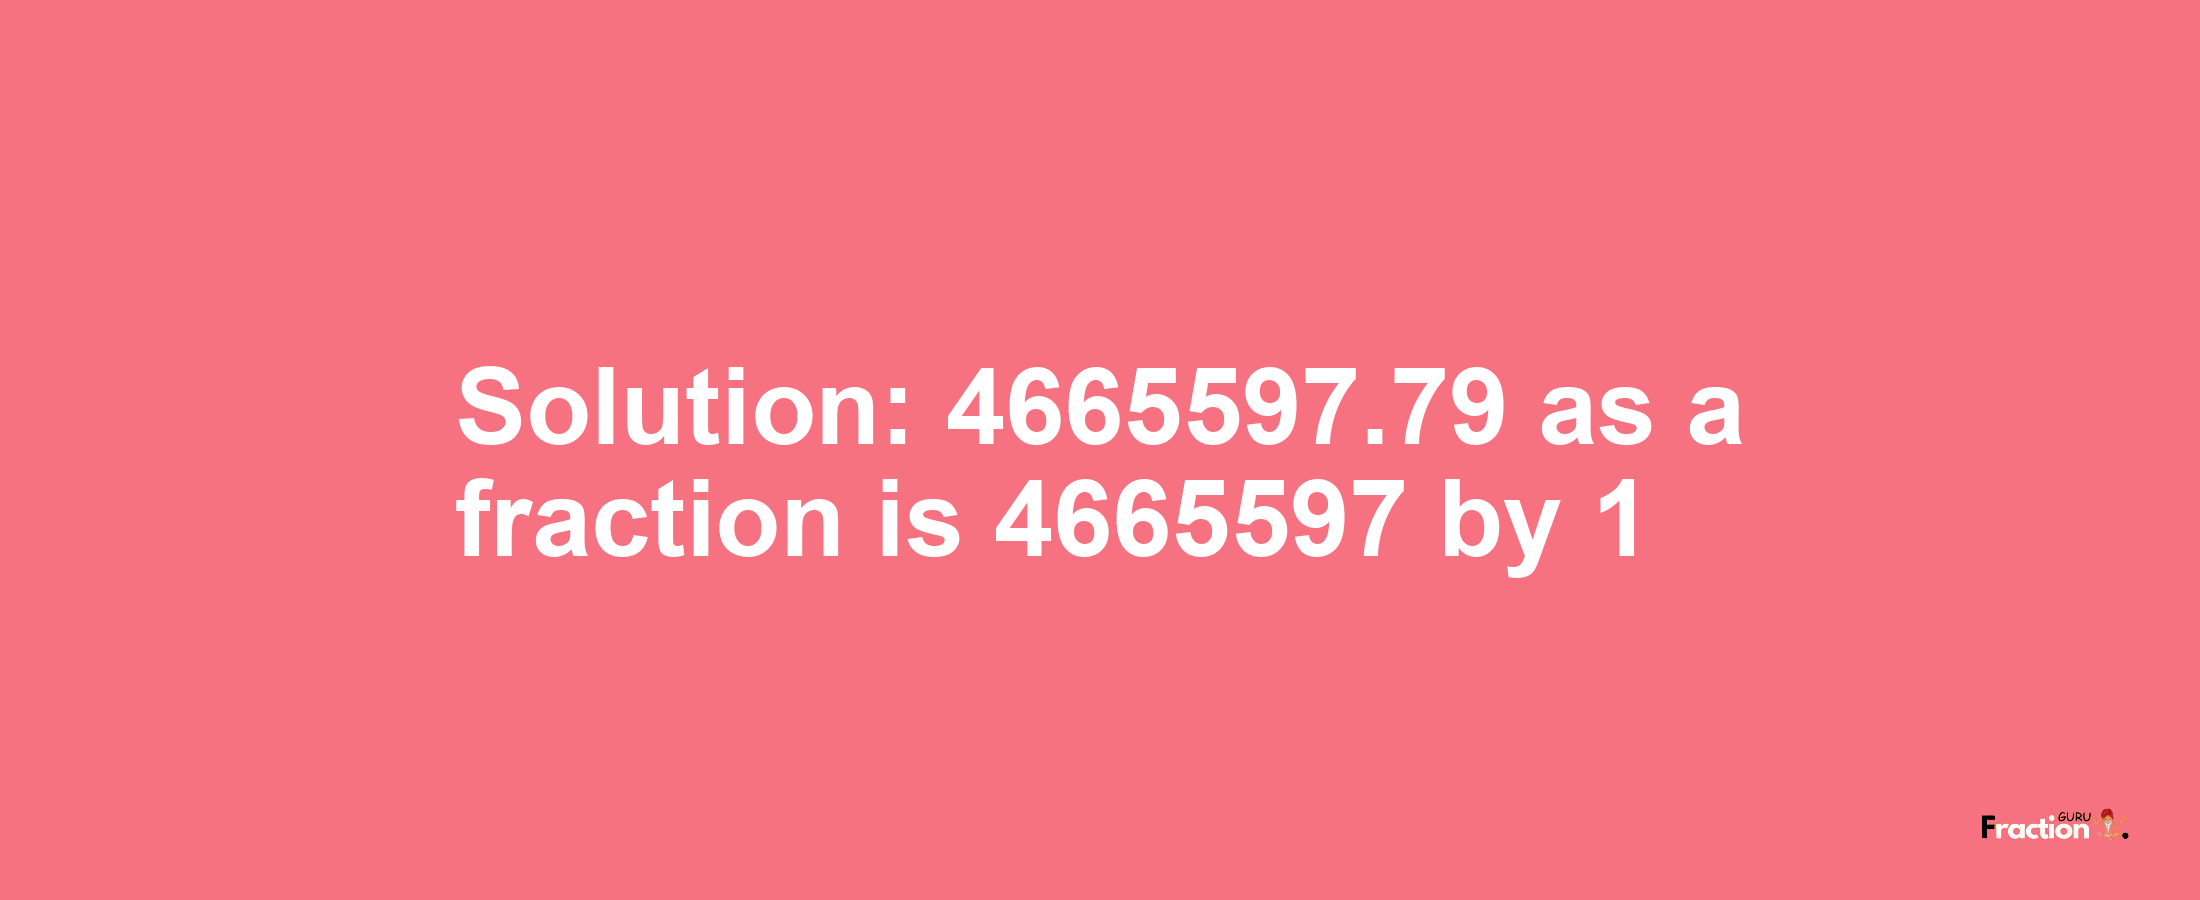 Solution:4665597.79 as a fraction is 4665597/1